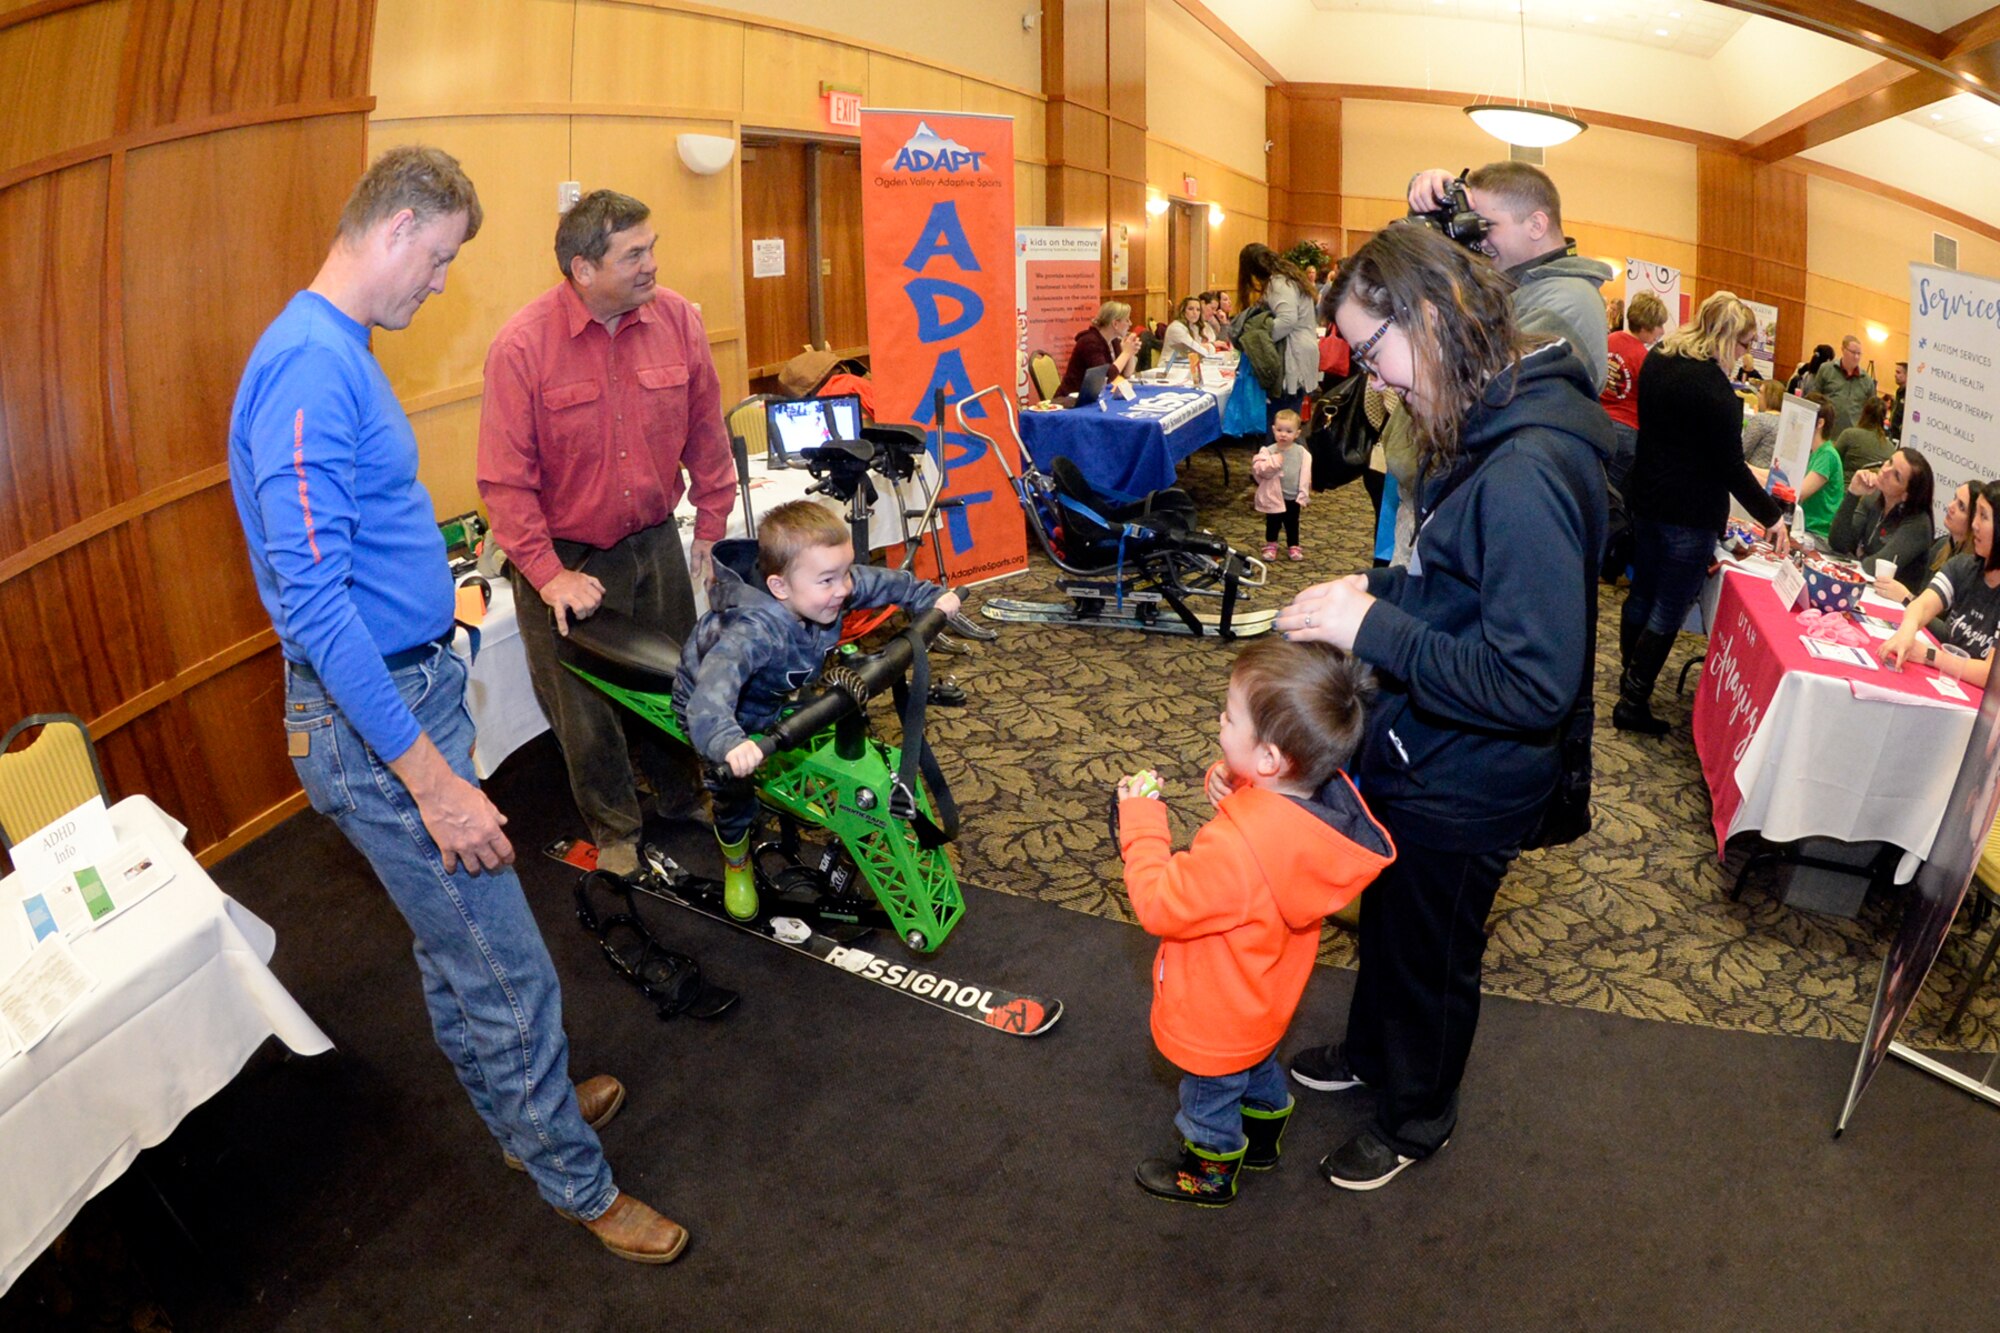 Don Hickman and Jim Bradley, ADAPT sports, demonstrate a ski chair to Sara Clippinger and children during the Special Needs Summit March 15, 2018, at Hill Air Force Base, Utah. The annual summit gives the base community a chance to research and learn about many special needs services and opportunities available in the area. (U.S. Air Force photo by Todd Cromar)